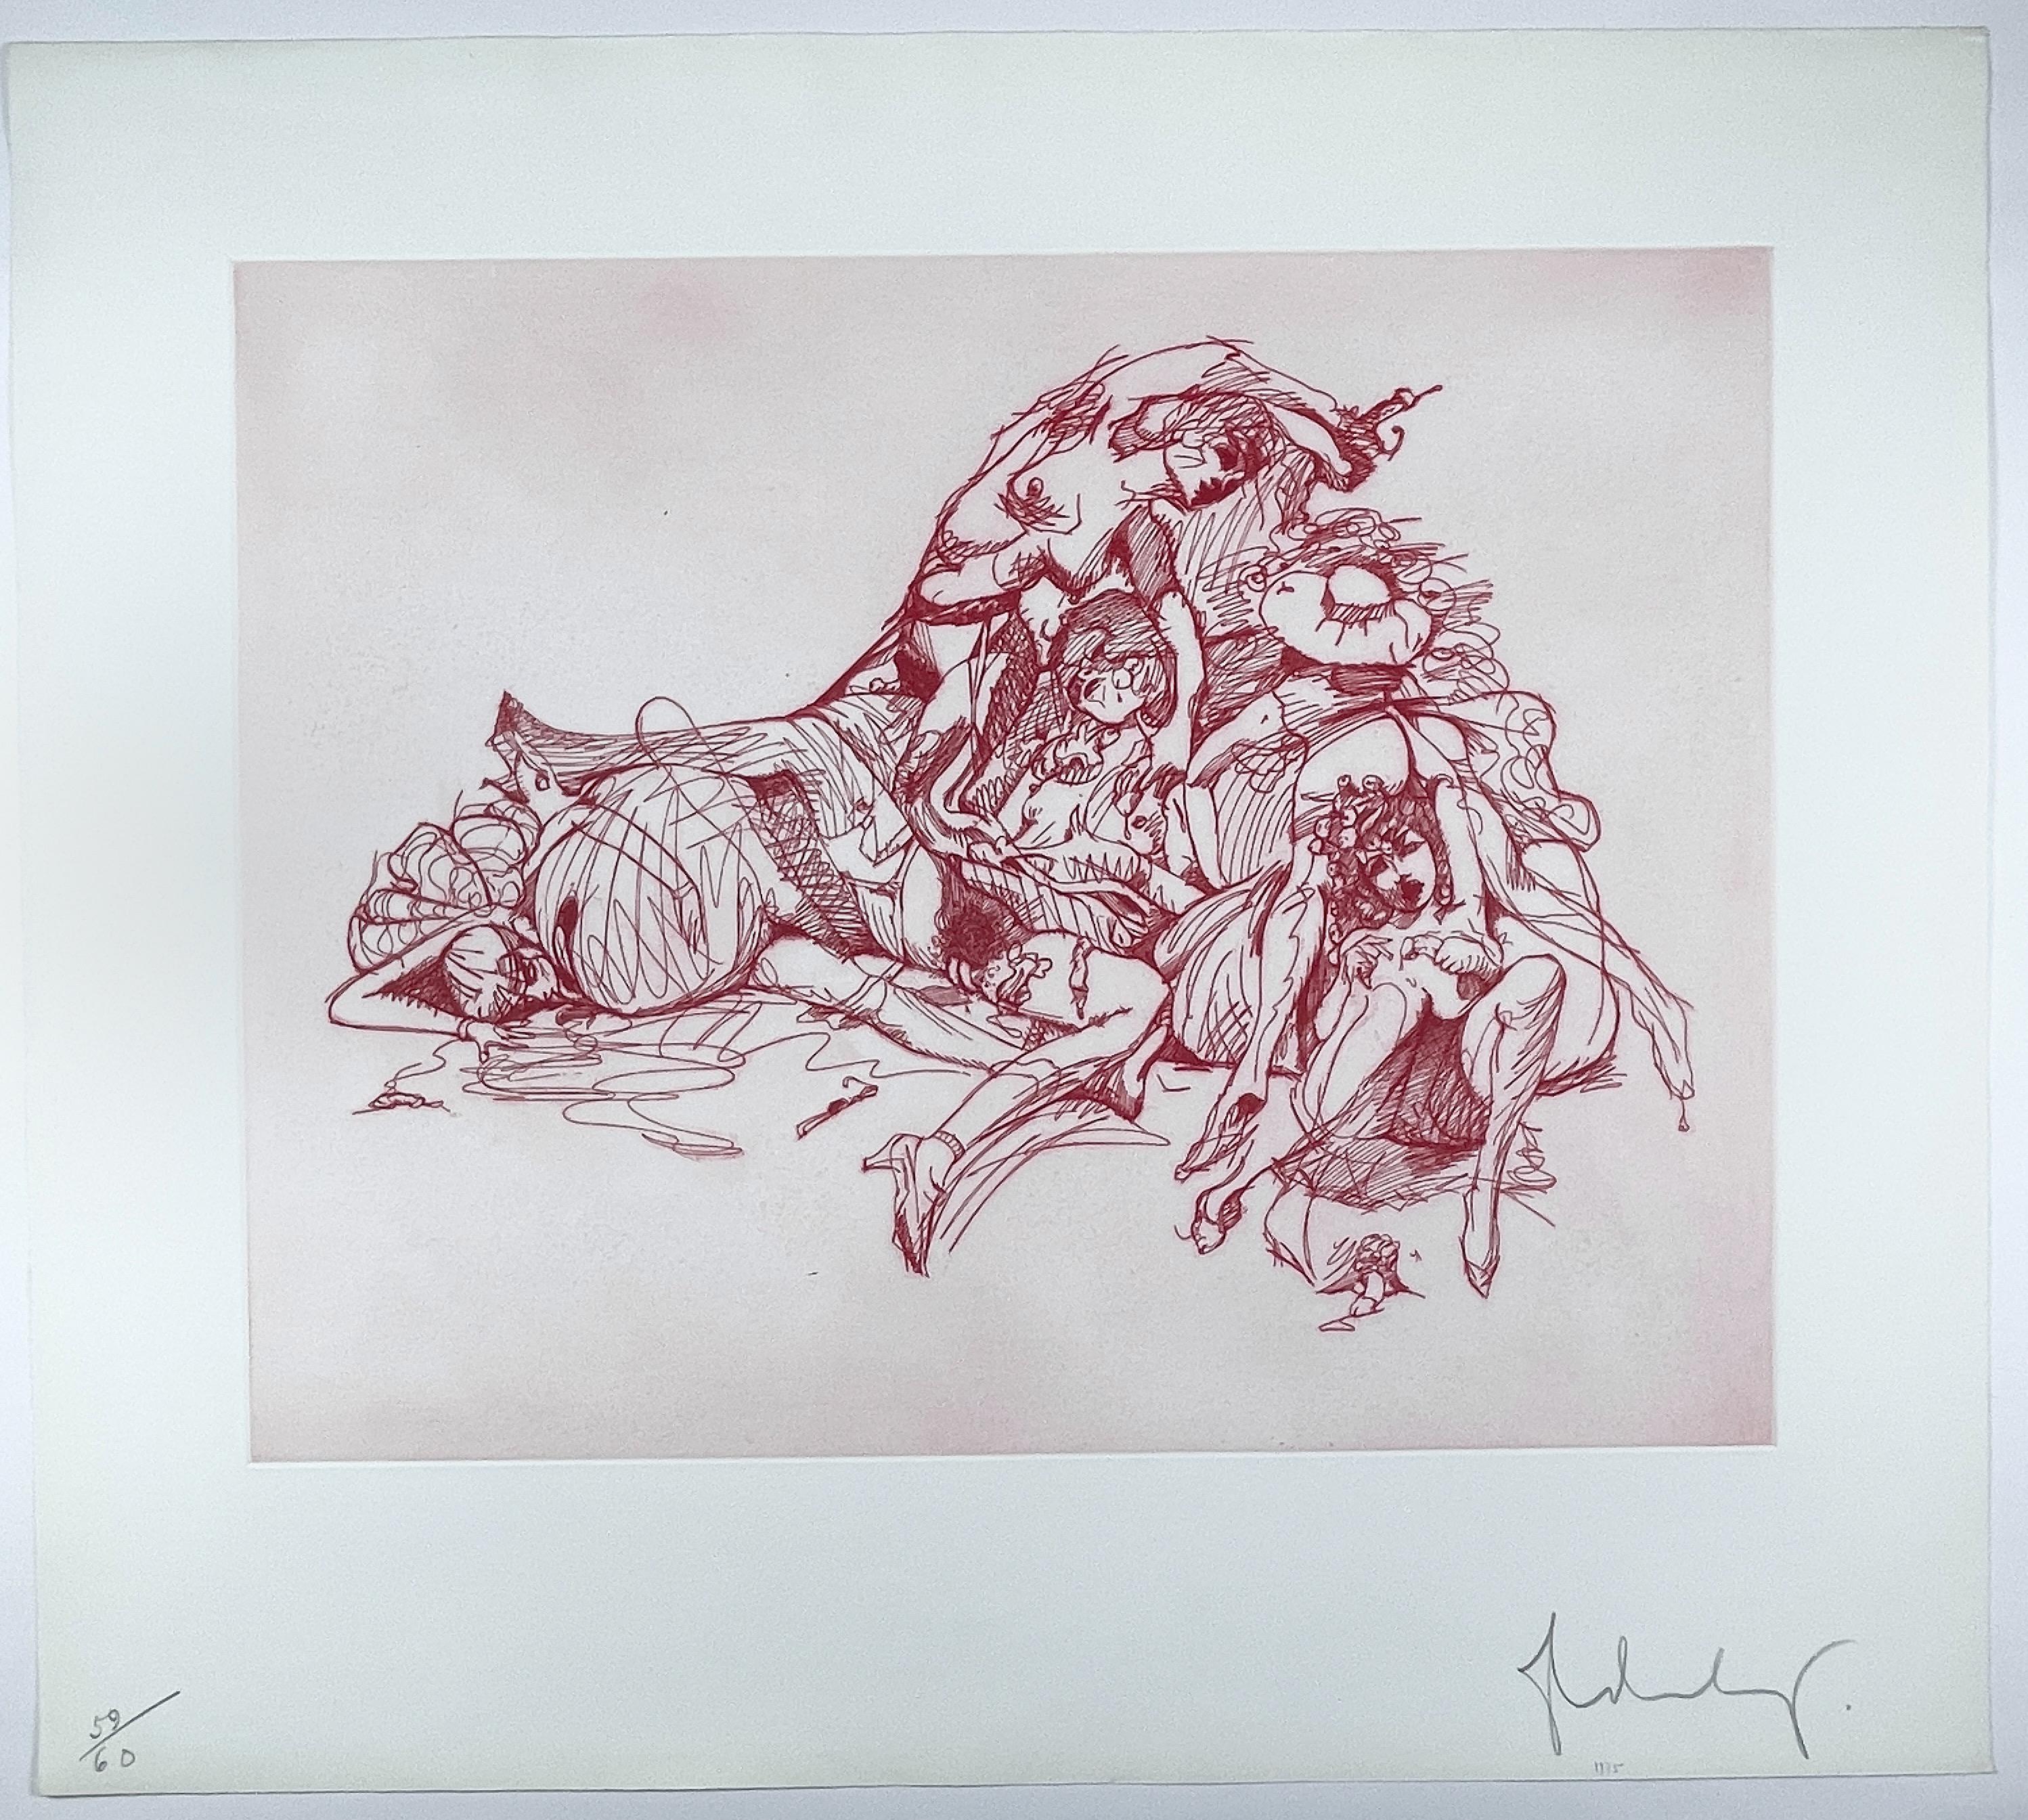 Study for a Monument in the Heroic/Erotic/Academic/Comic Style Claes Oldenburg For Sale 6